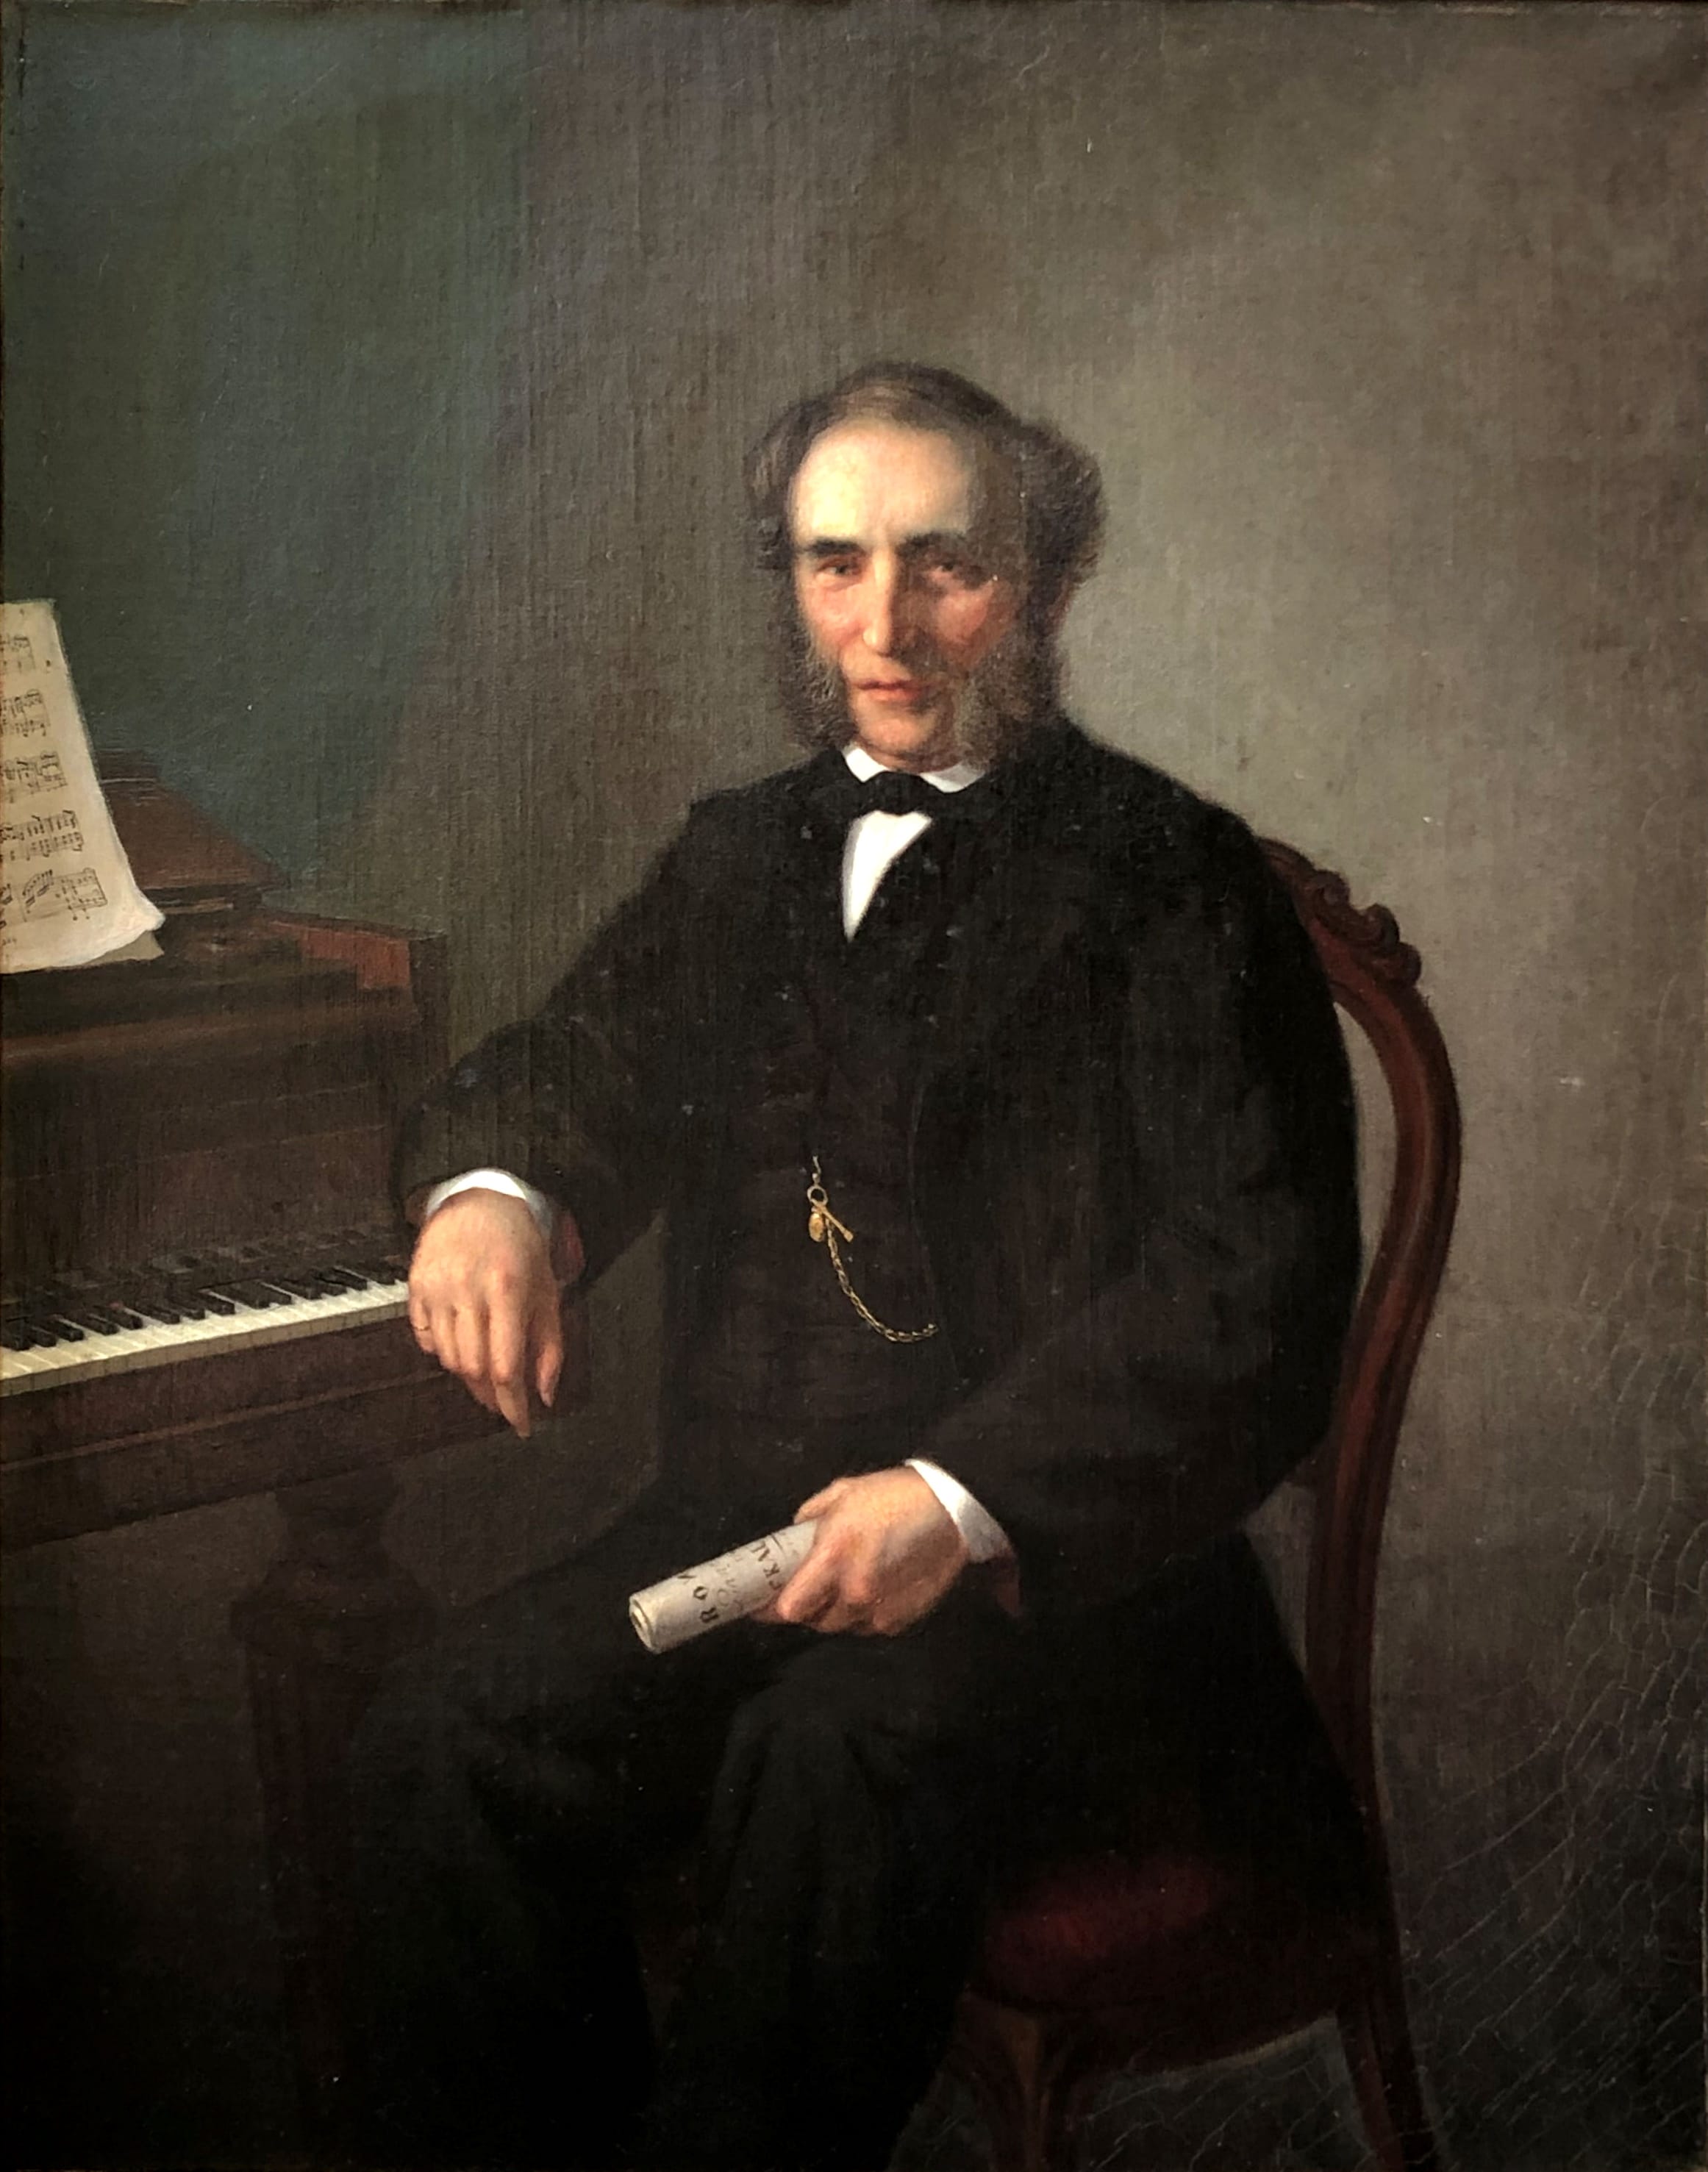 Portrait of a man, with piano, thought to be Richard John Paling, of Melbourne, collection of Richard d'Apice